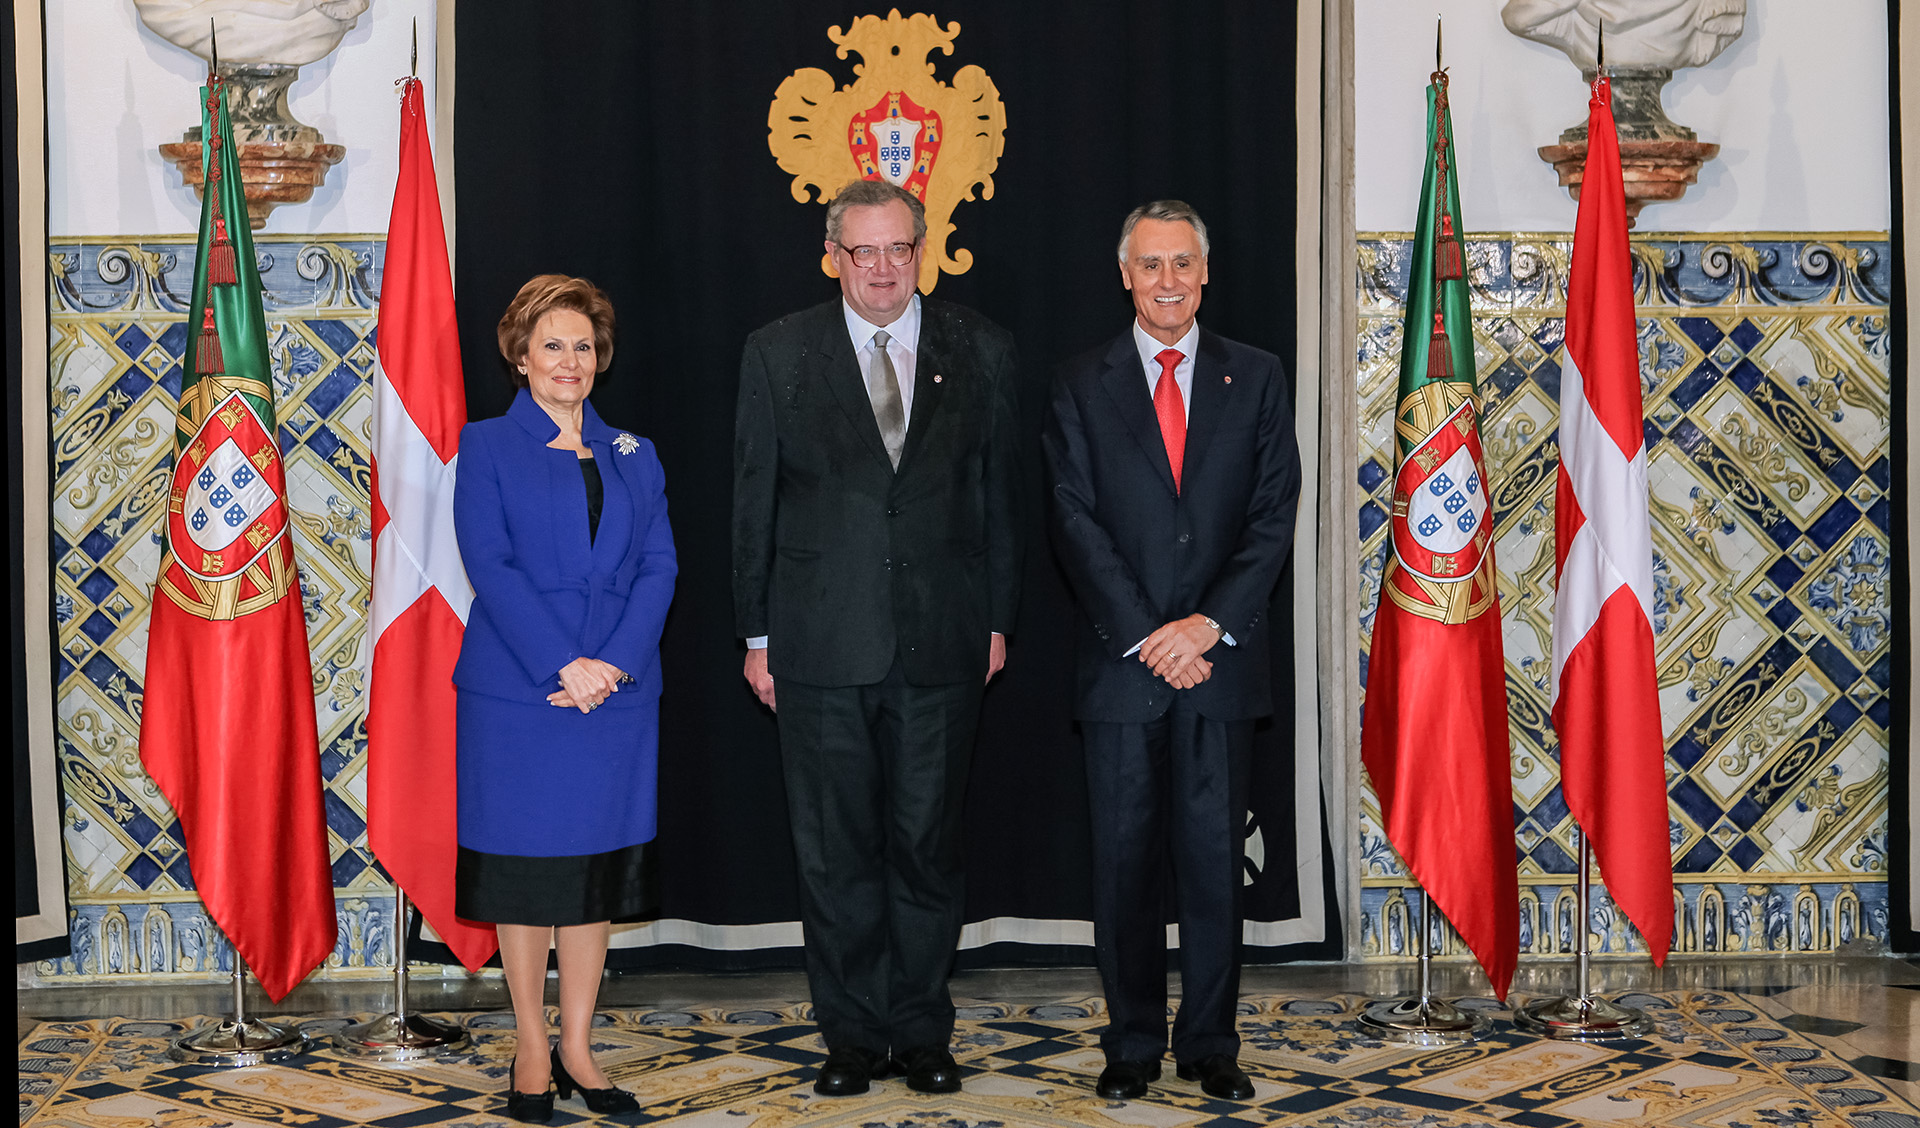 The Grand Master’s state visit to Portugal